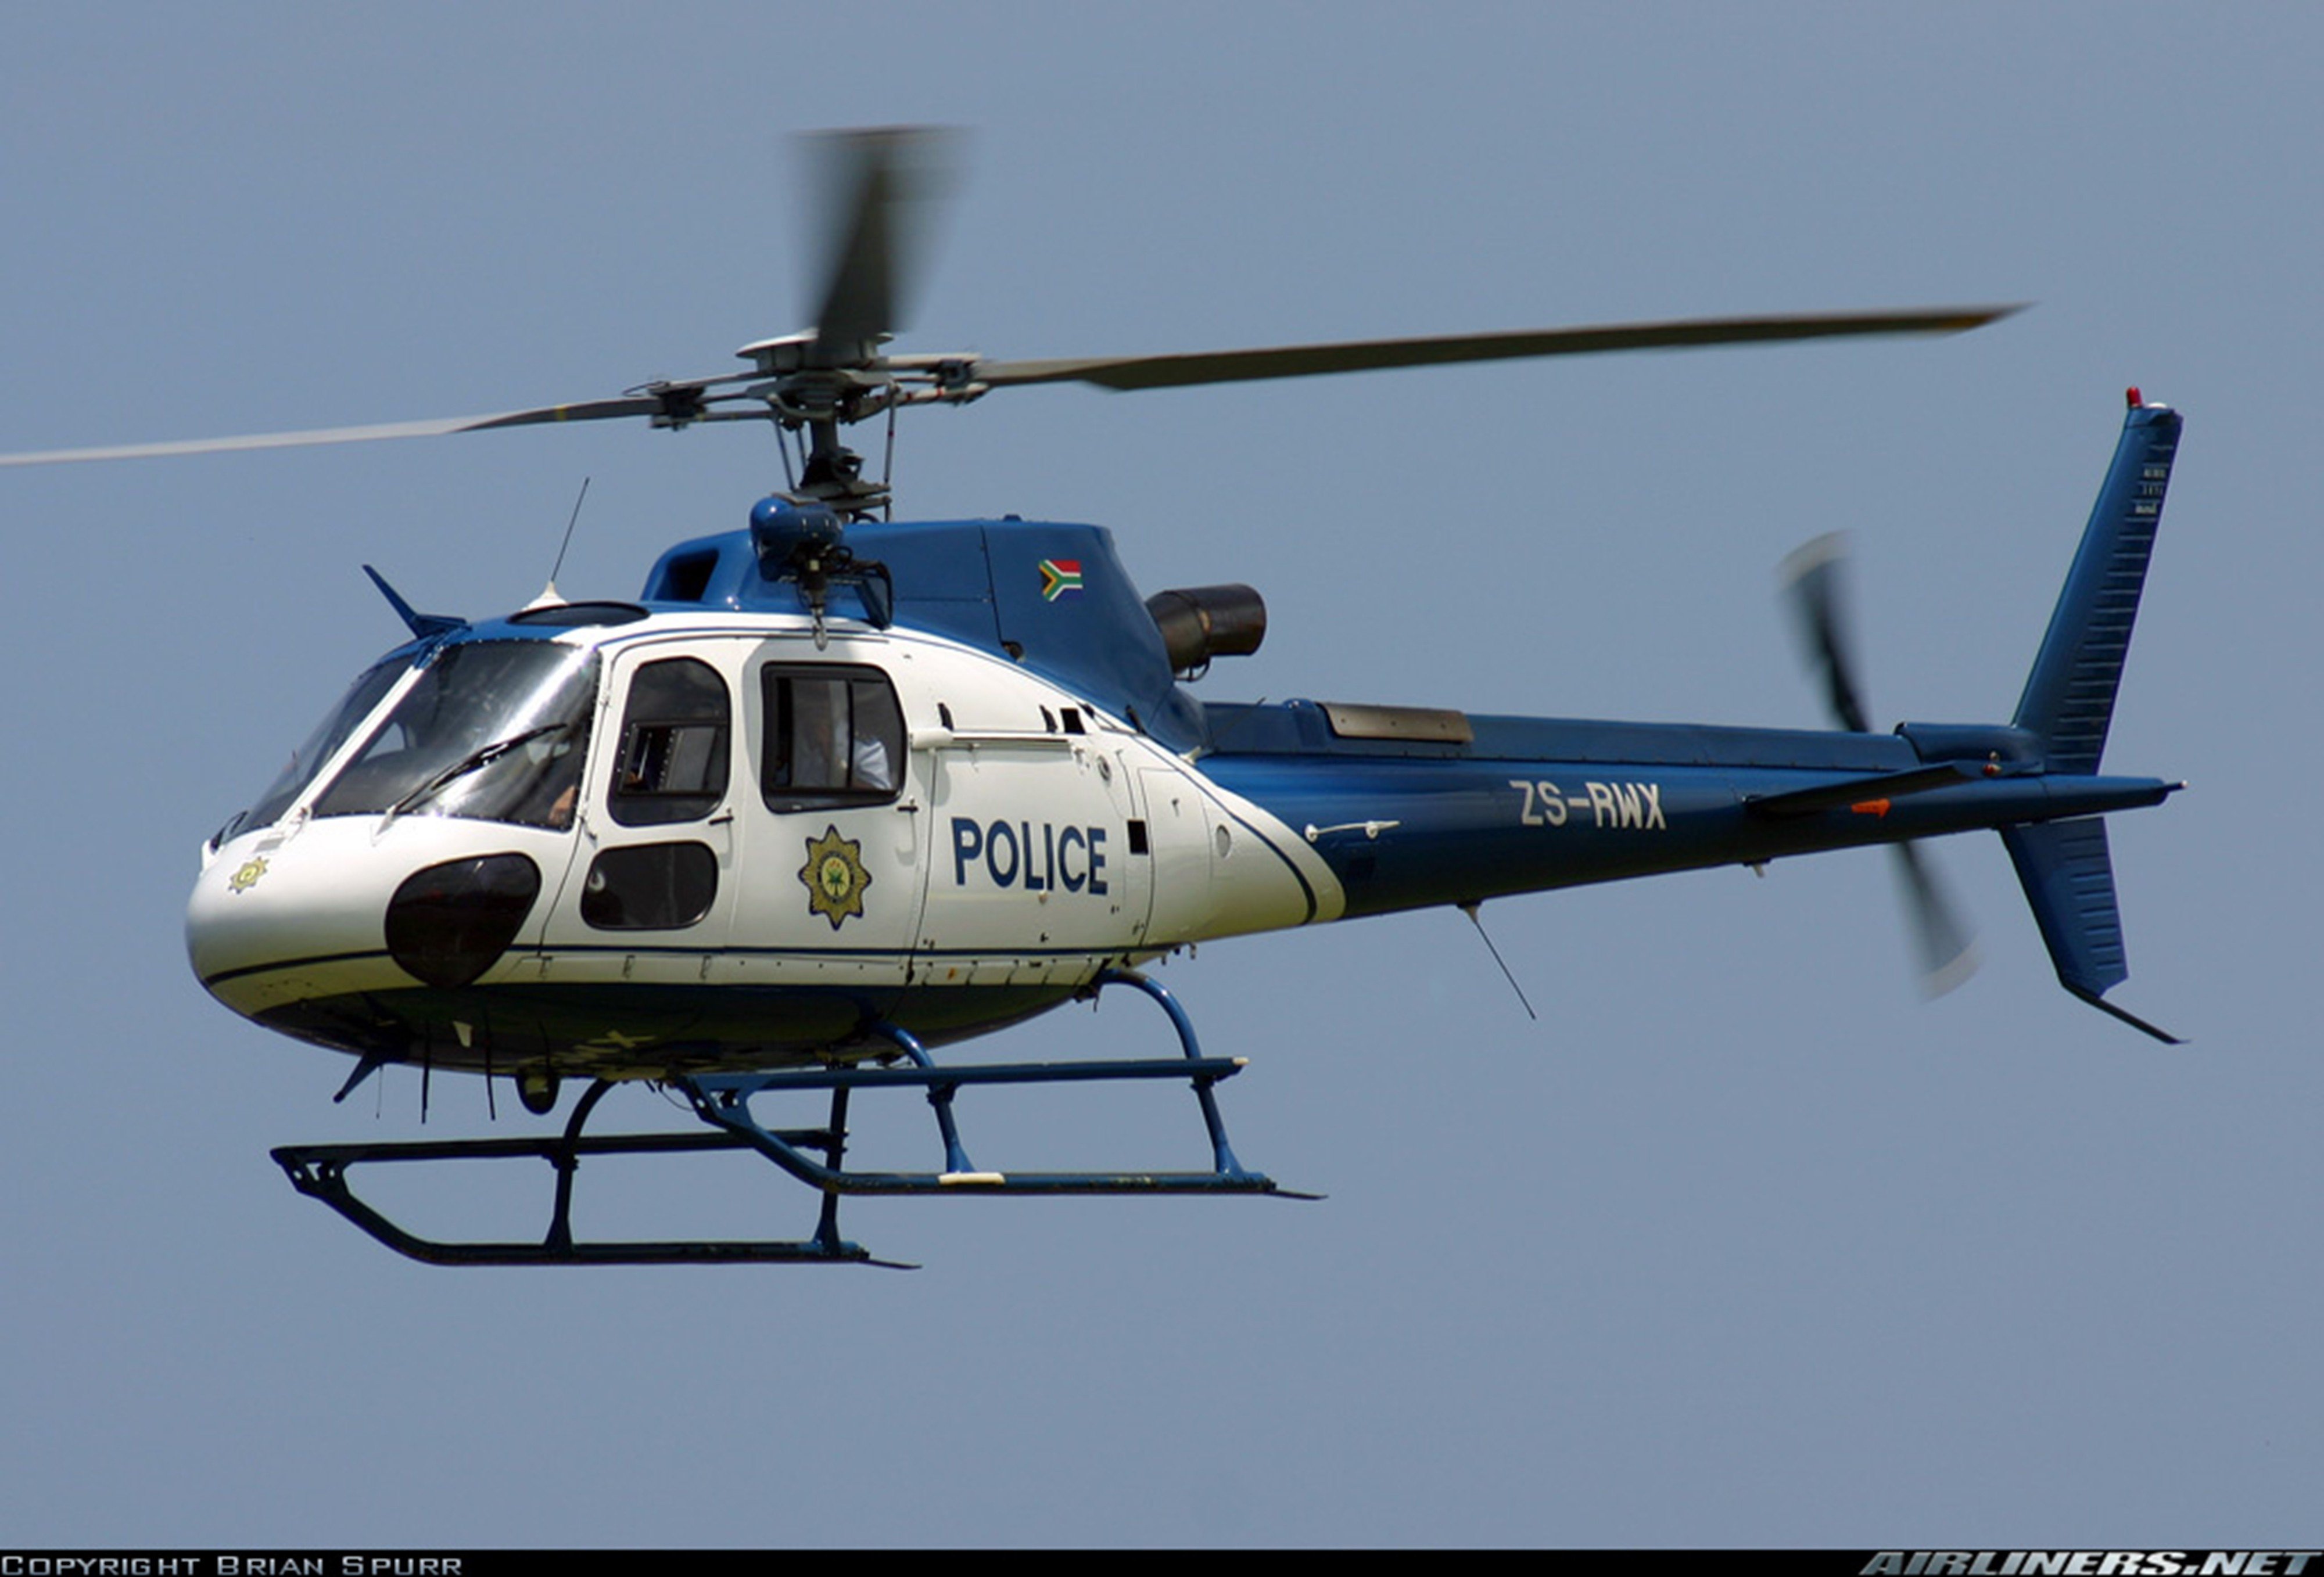 helicopter, Aircraft, Vehicle, Police, South africa Wallpaper